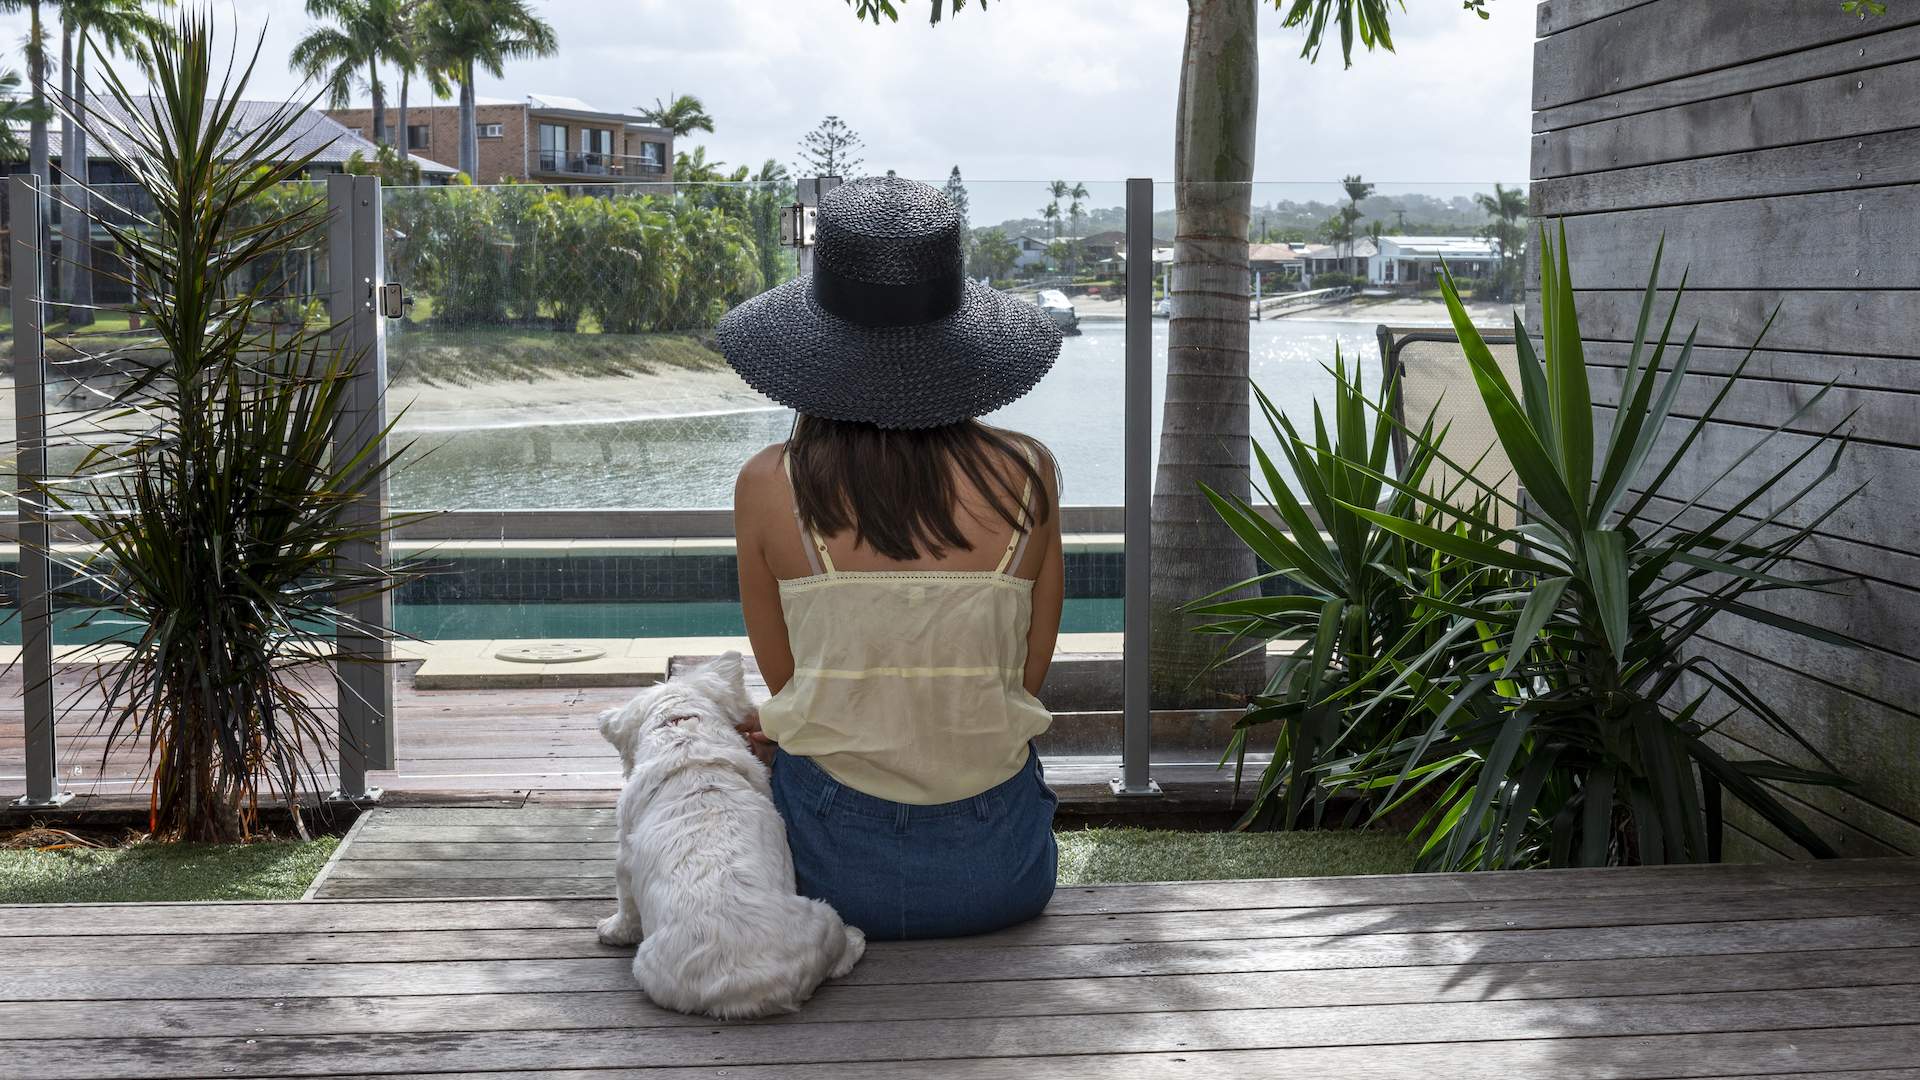 Saltwater Villas
Best Dog-Friendly Hotels, B&Bs and Self-Contained Getaways in Queensland